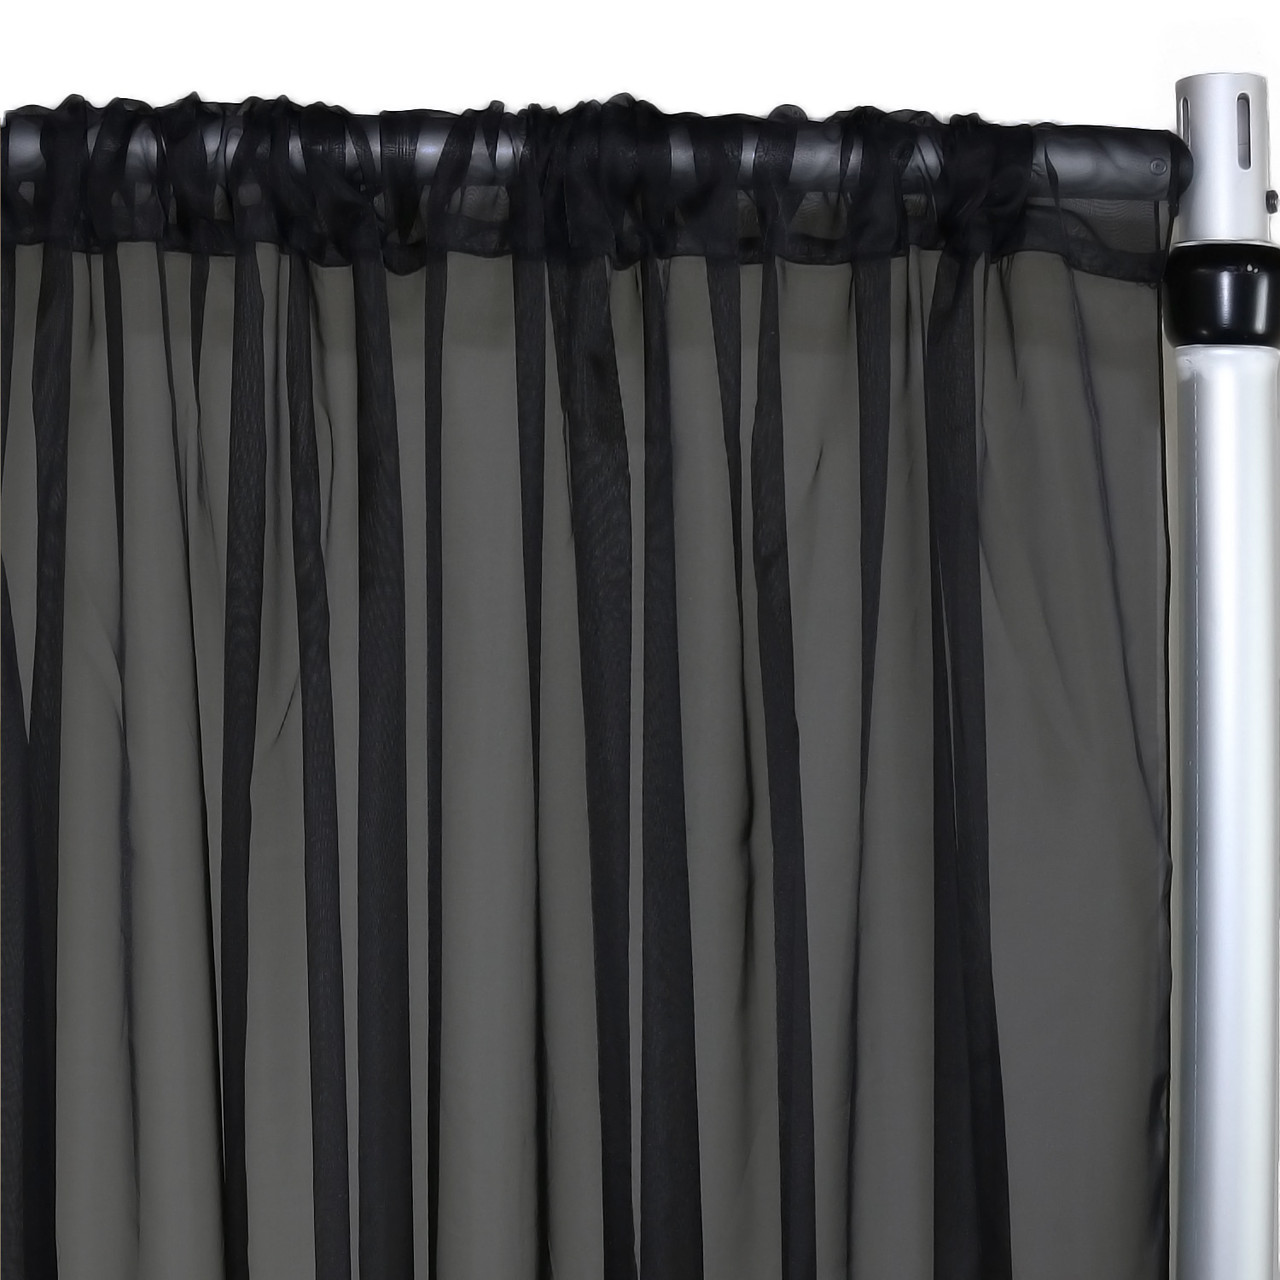 Voile Sheer Drape/Backdrop 8 ft x 116 Inches Black - Your Chair Covers Inc.